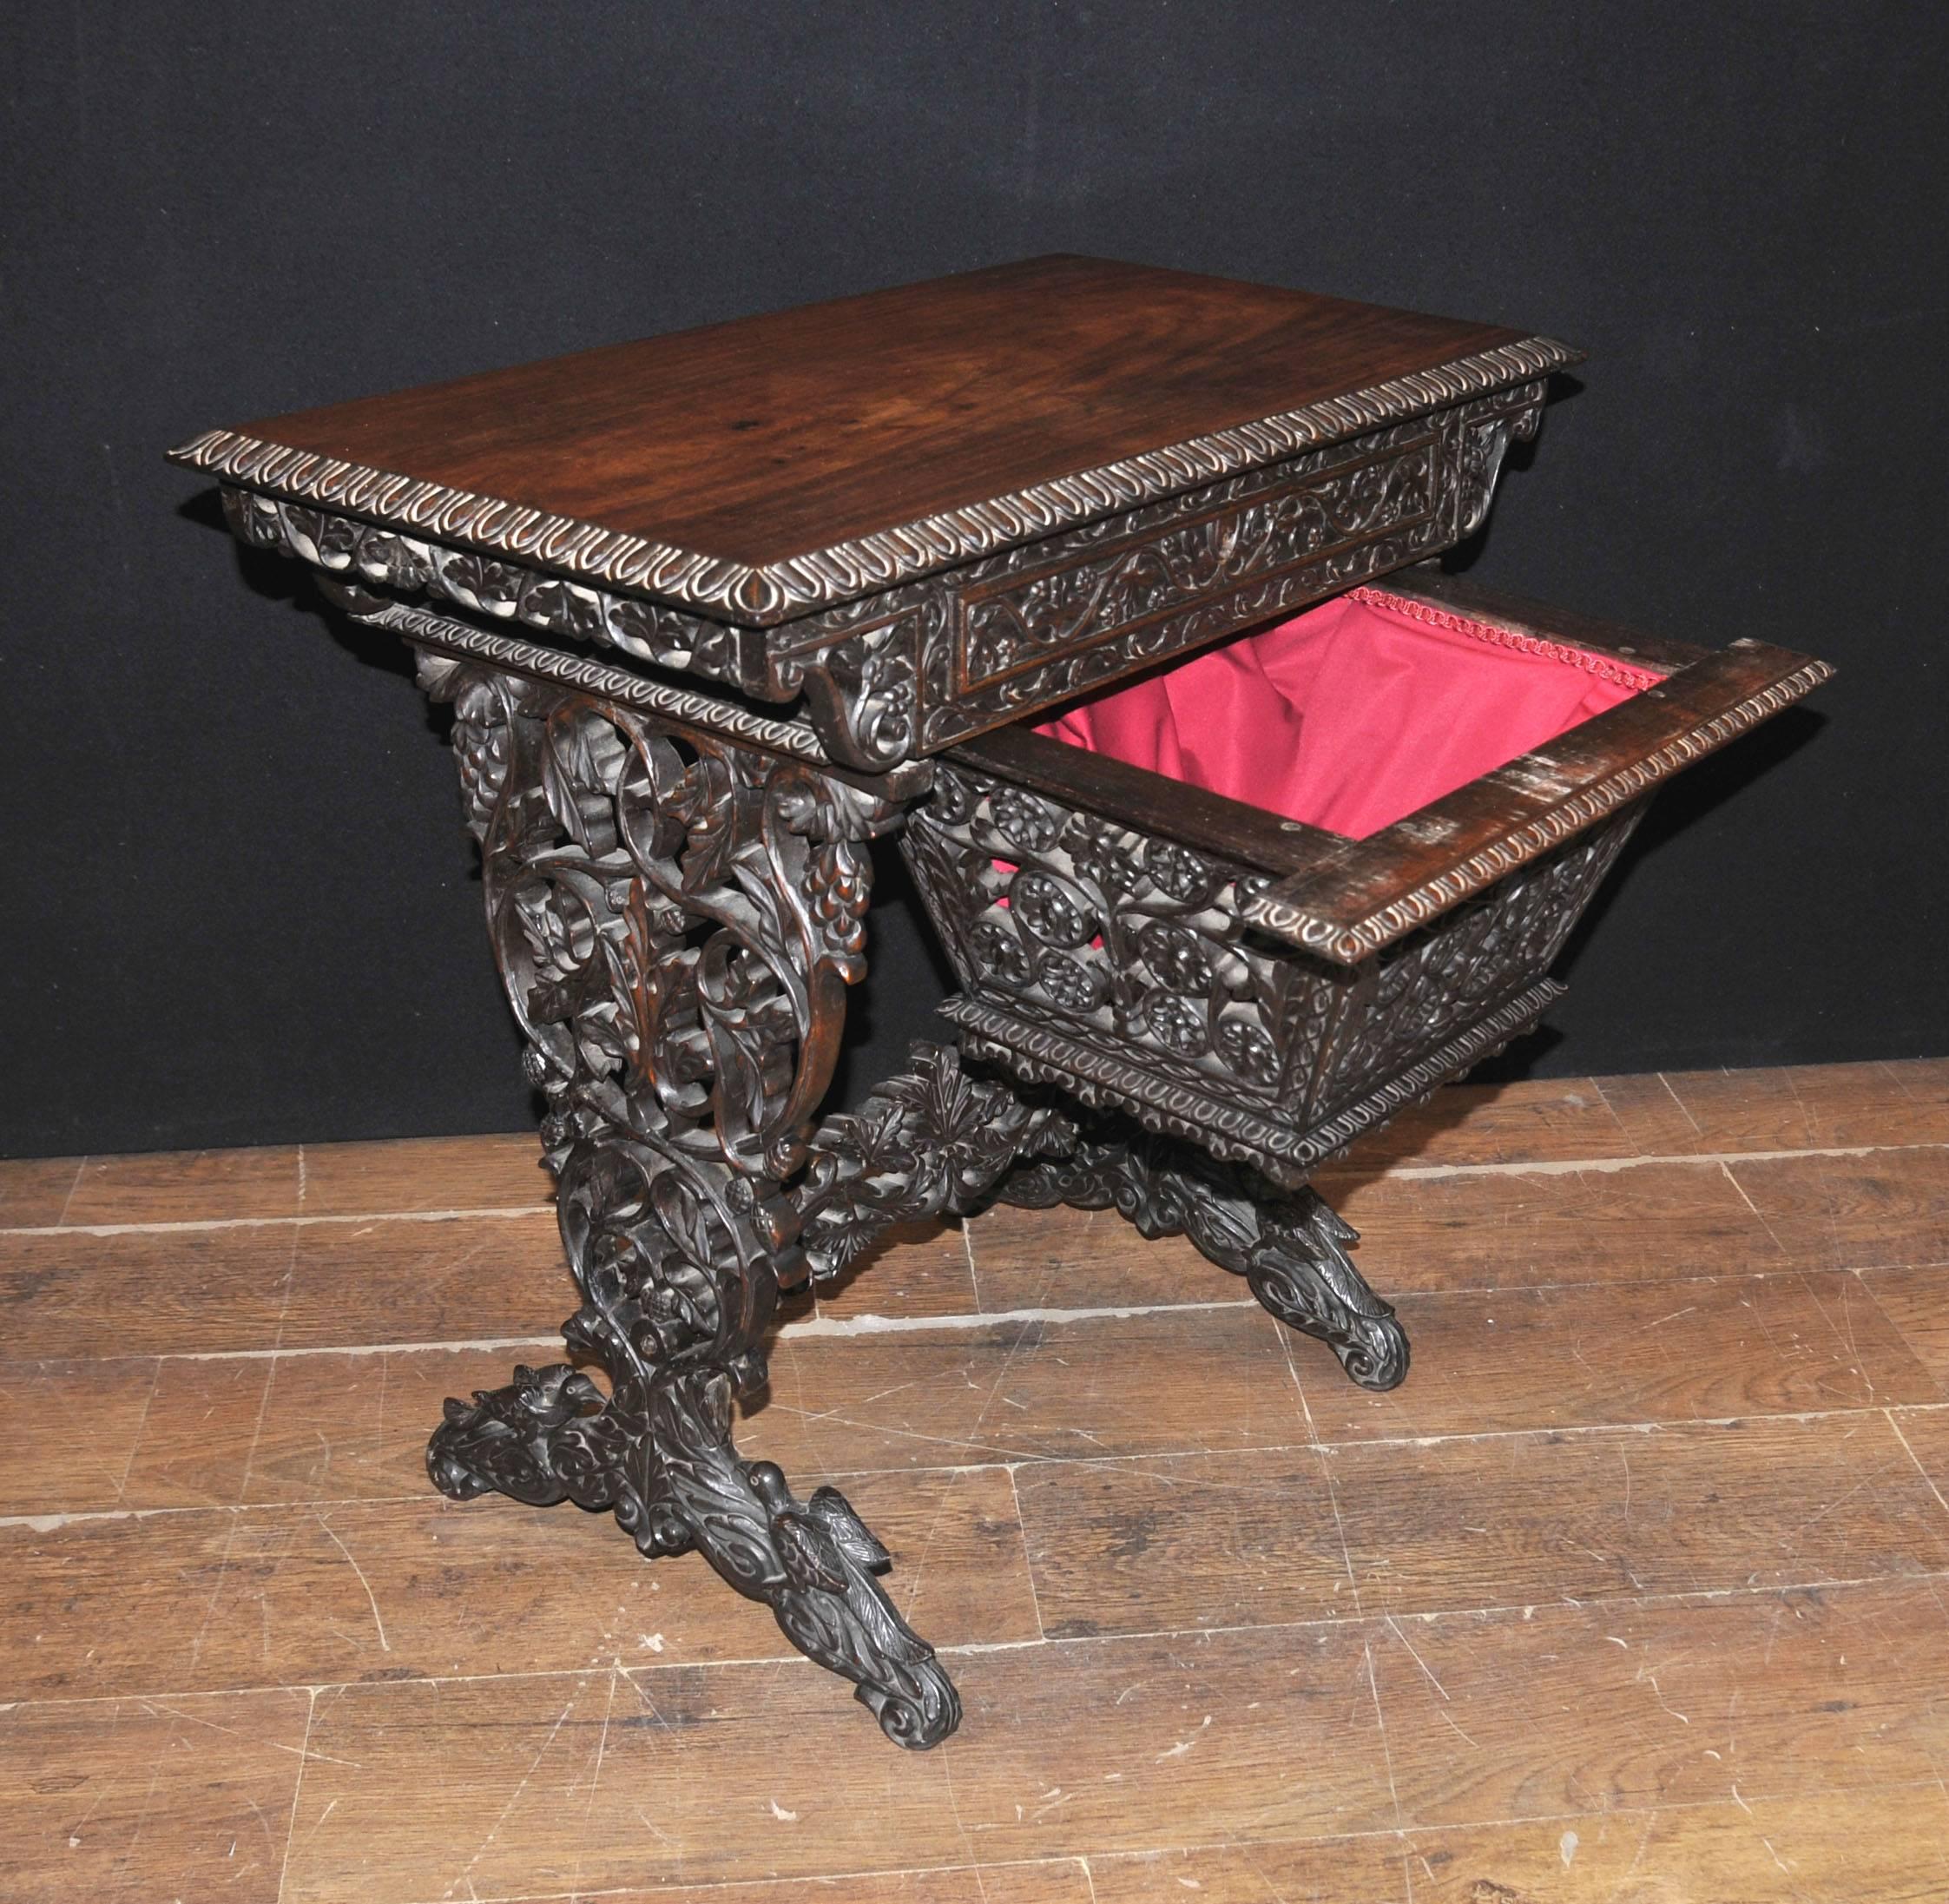 Antique Hand-Carved Burmese Desk Writing Table, 1890, Hardwood In Good Condition For Sale In Potters Bar, Herts